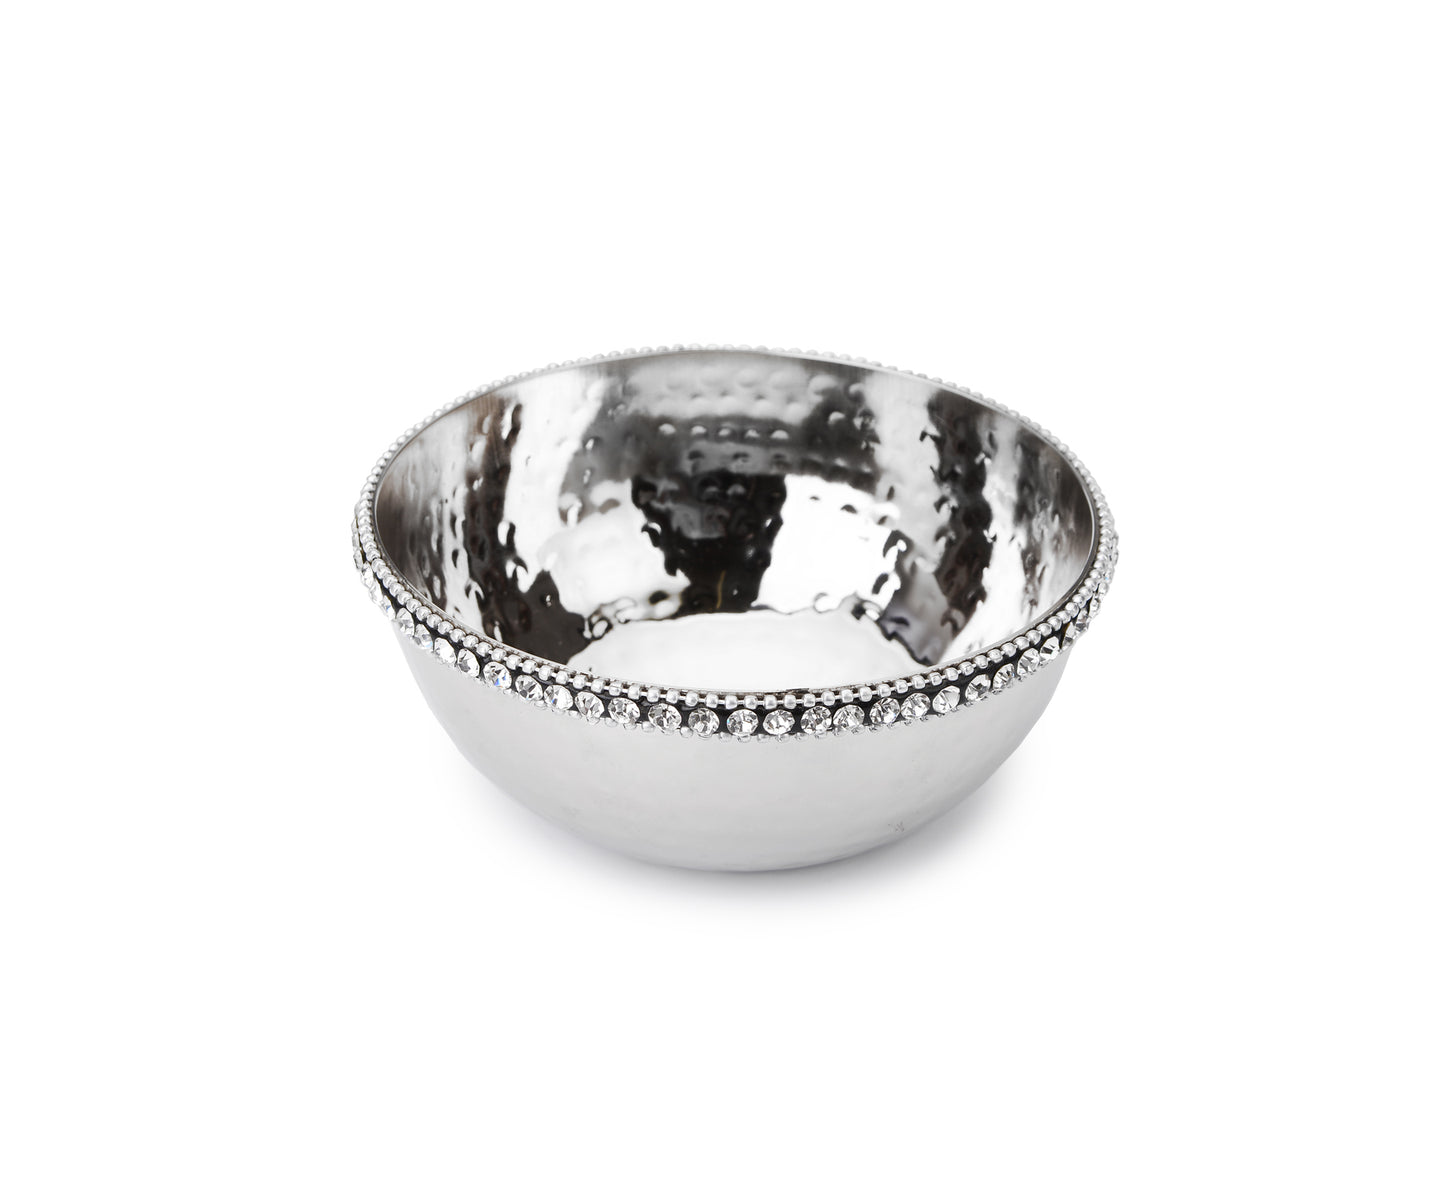 Stainless Steel Candy Dish with Crystal Beads